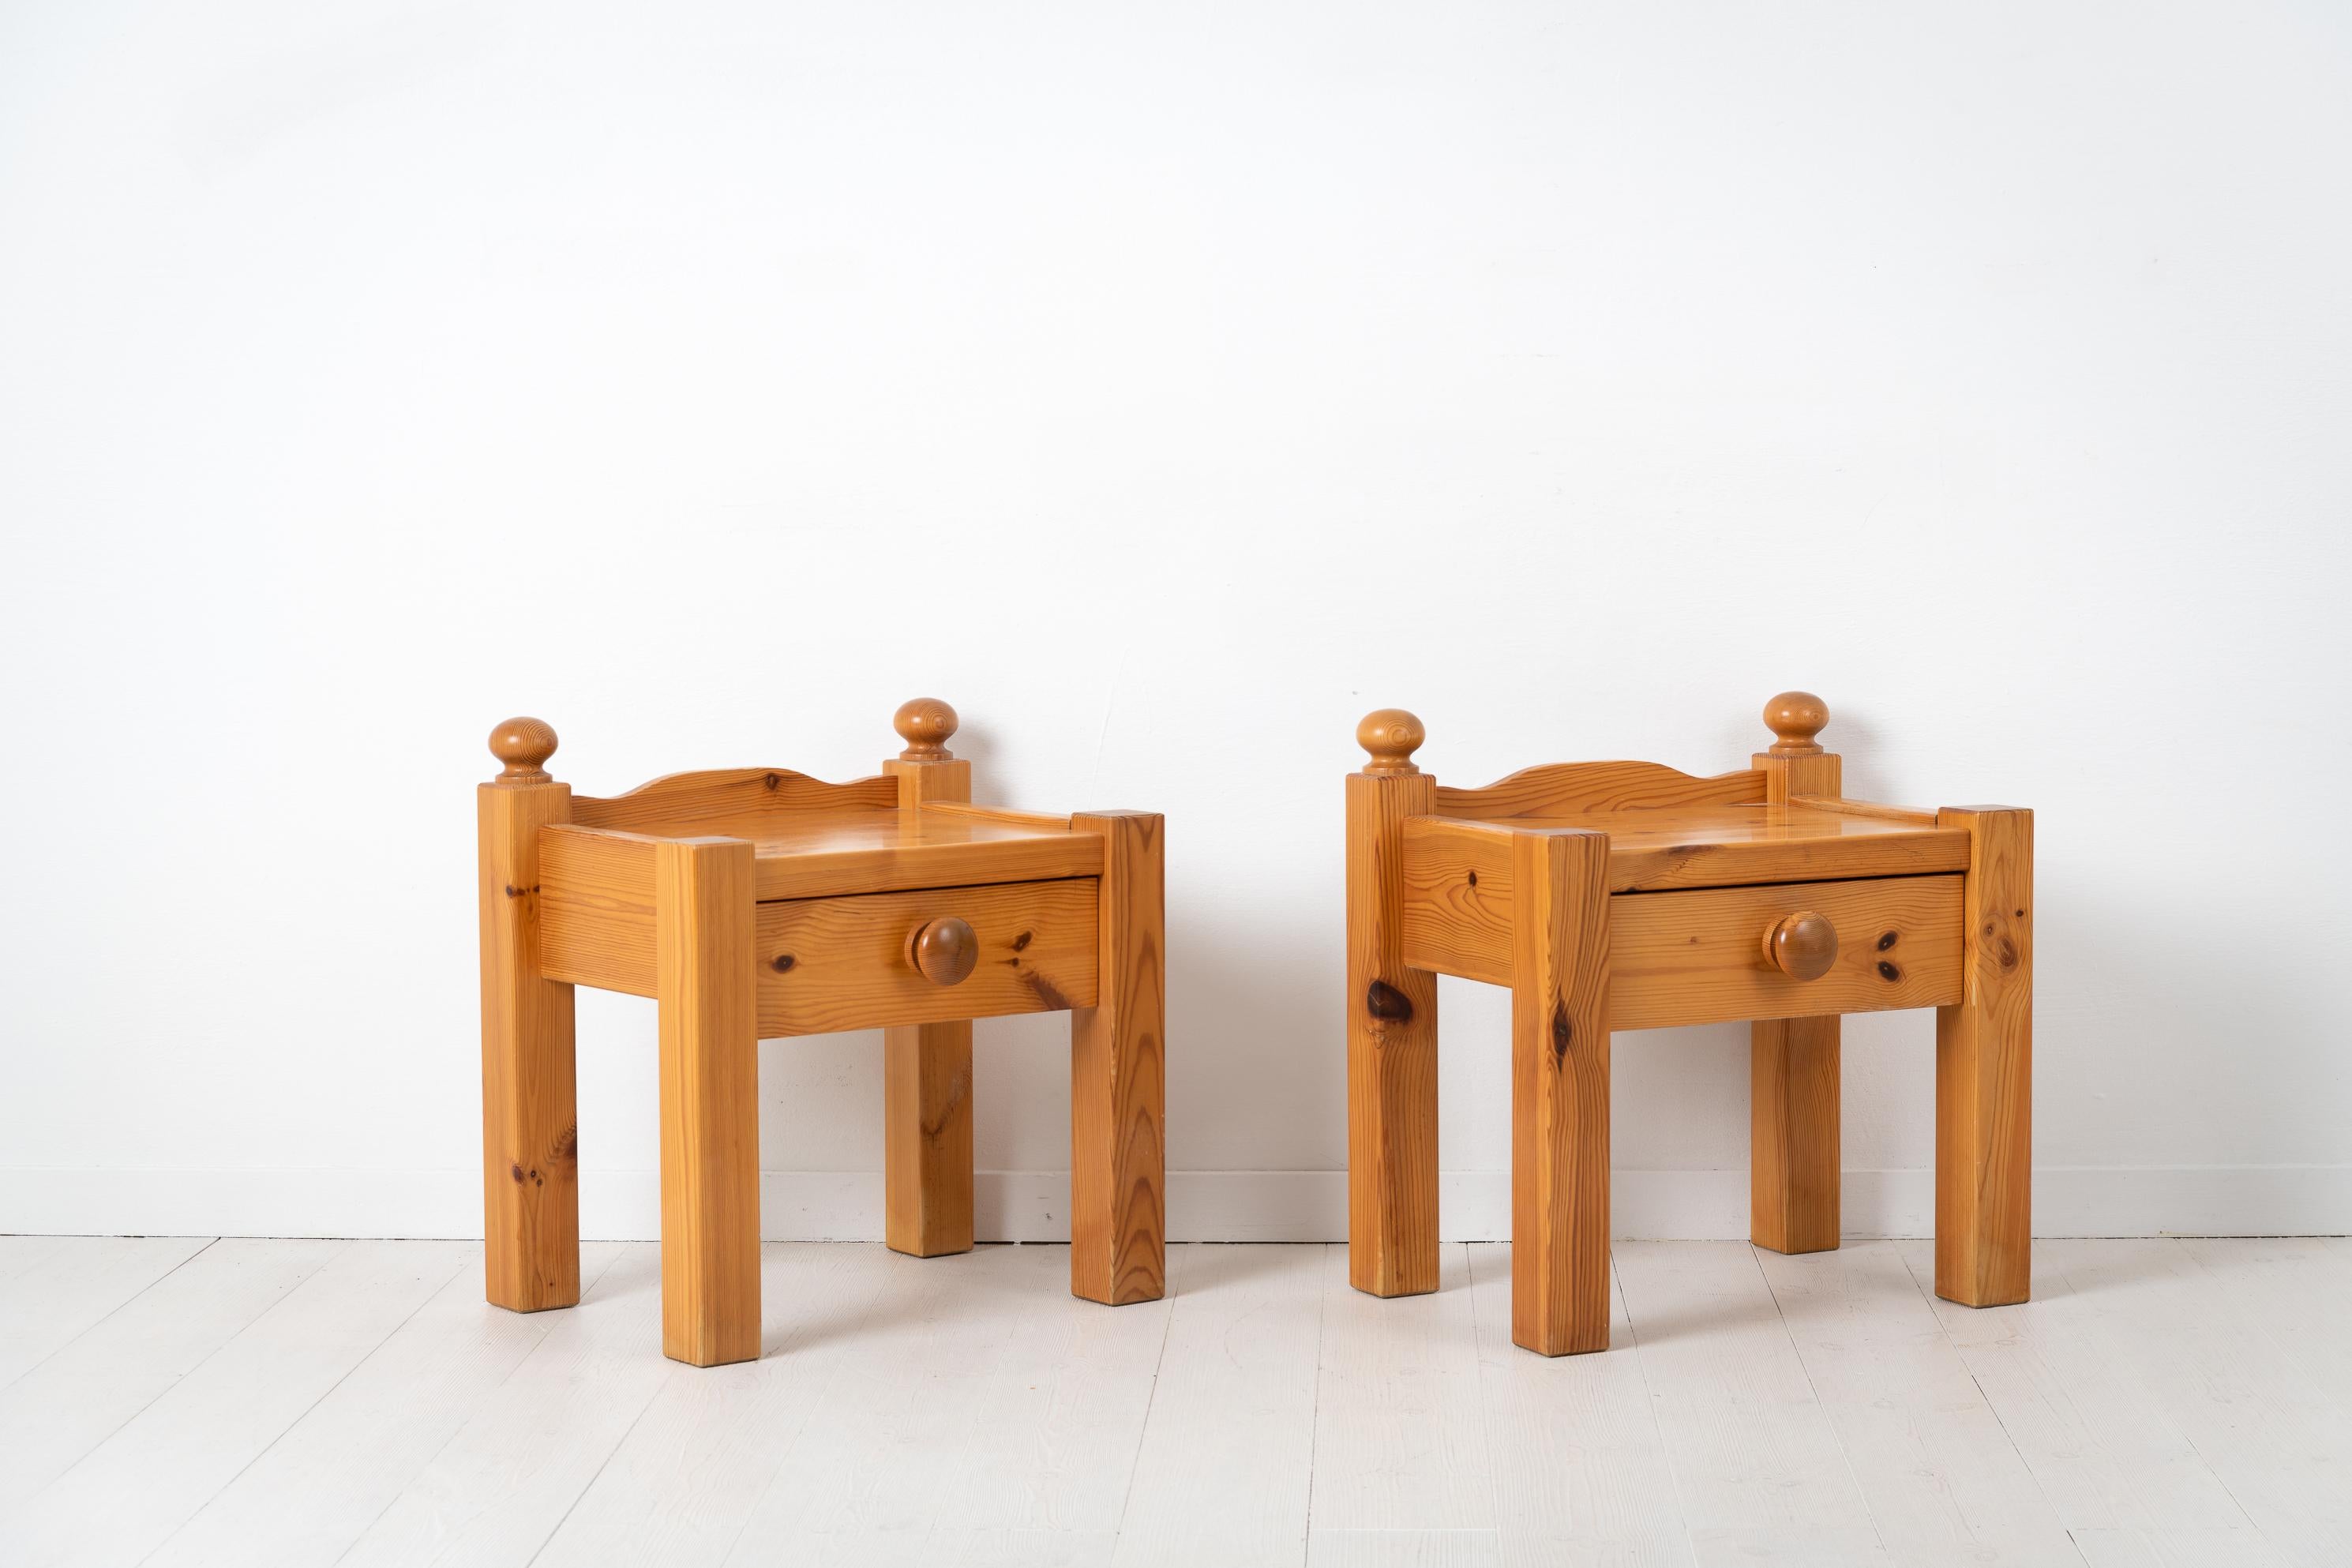 Pair of nightstands from Sweden made during the 1970s. The nightstands are lacquered solid pine with a large single drawer. Height to the table top is 45 cm and height to the back rim is 48.5 cm. The nightstands are in good vintage condition